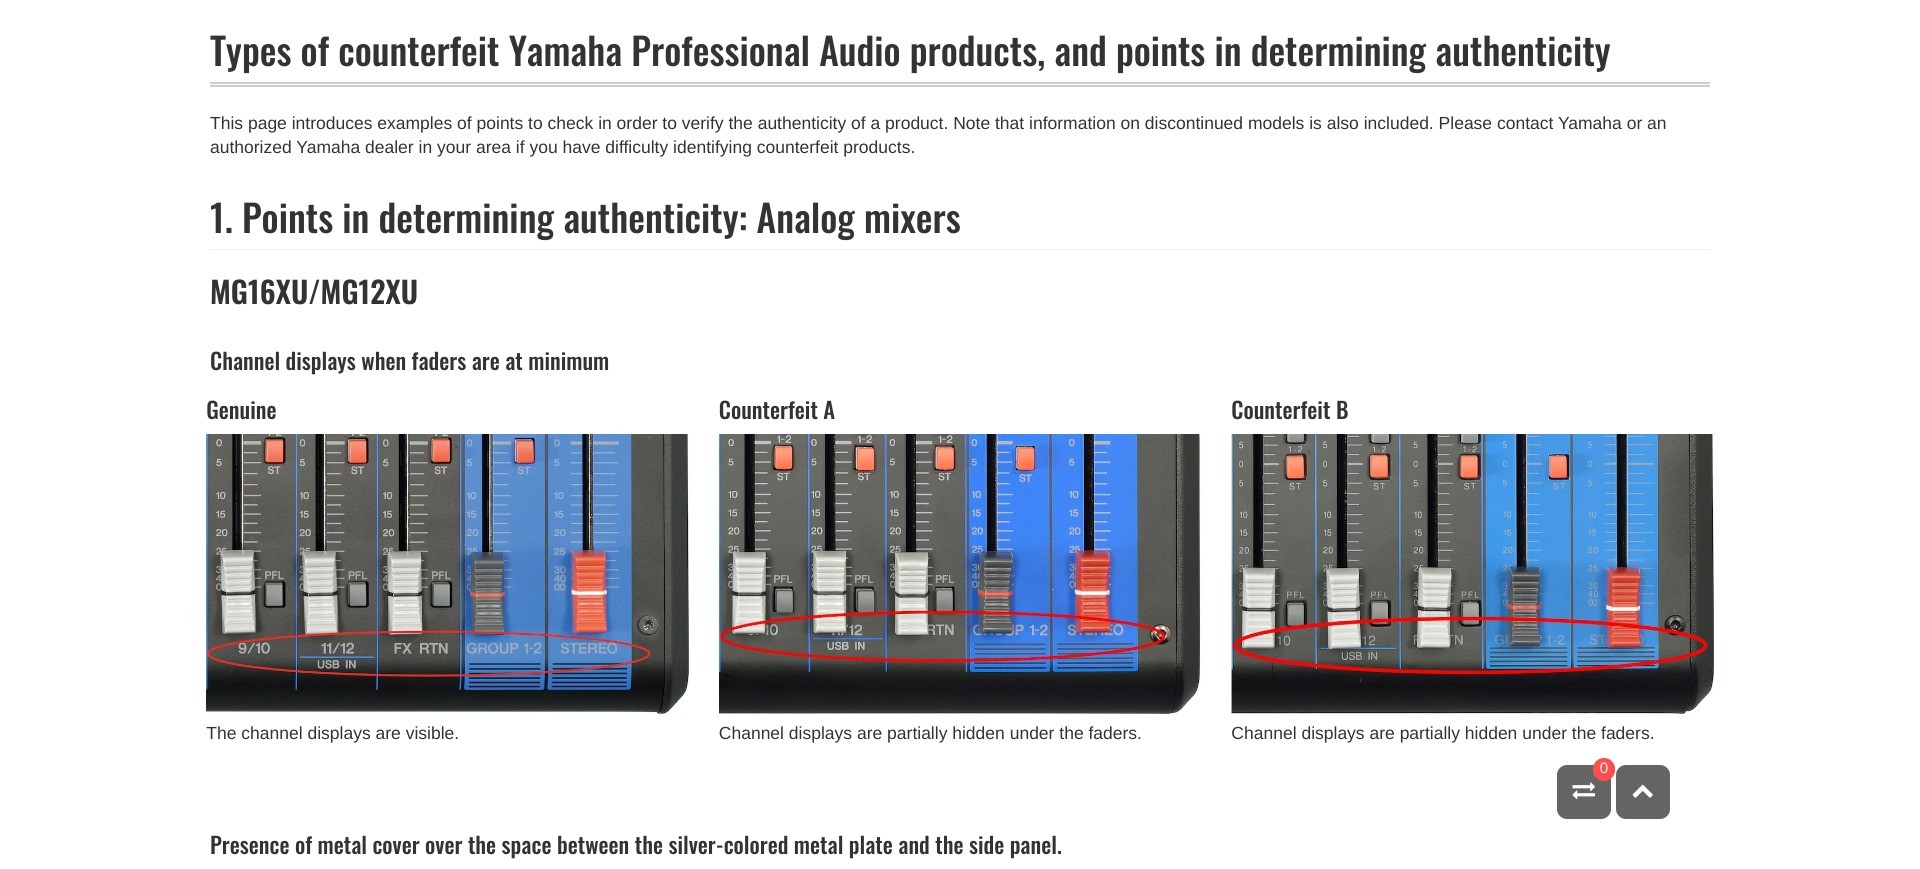 Screenshot of https://asia-latinamerica-mea.yamaha.com/en/products/contents/proaudio/counterfeit/index.html displaying the difference between an authentic Yamaha analog mixer and two fake ones